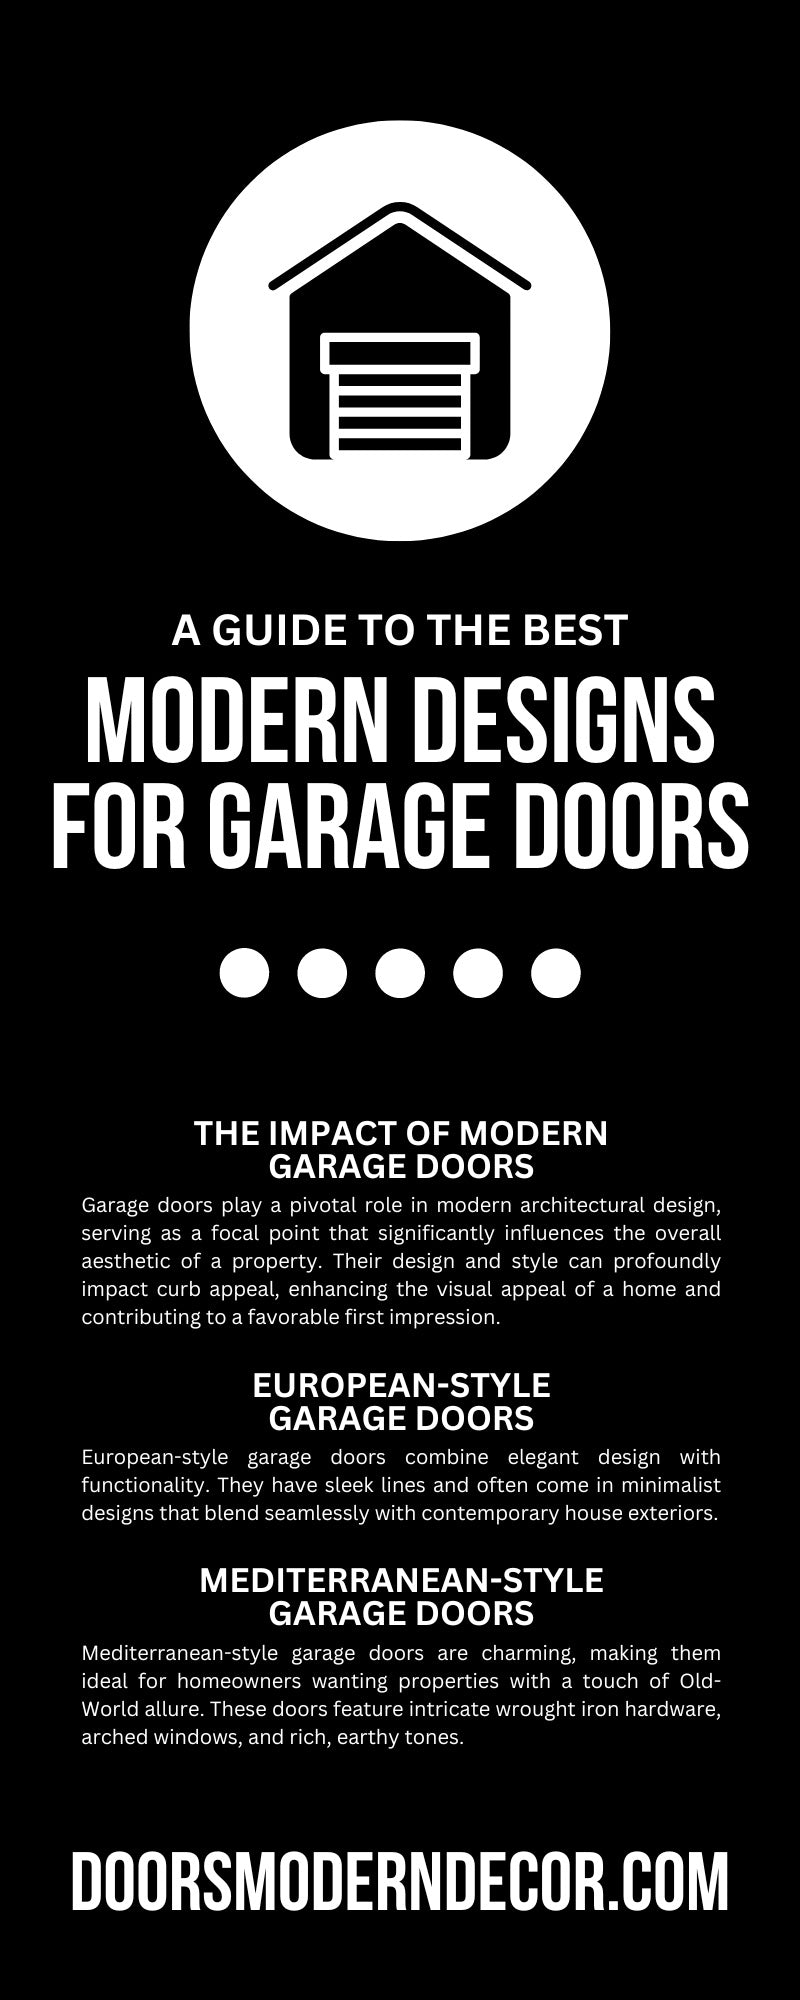 A Guide to the Best Modern Designs for Garage Doors